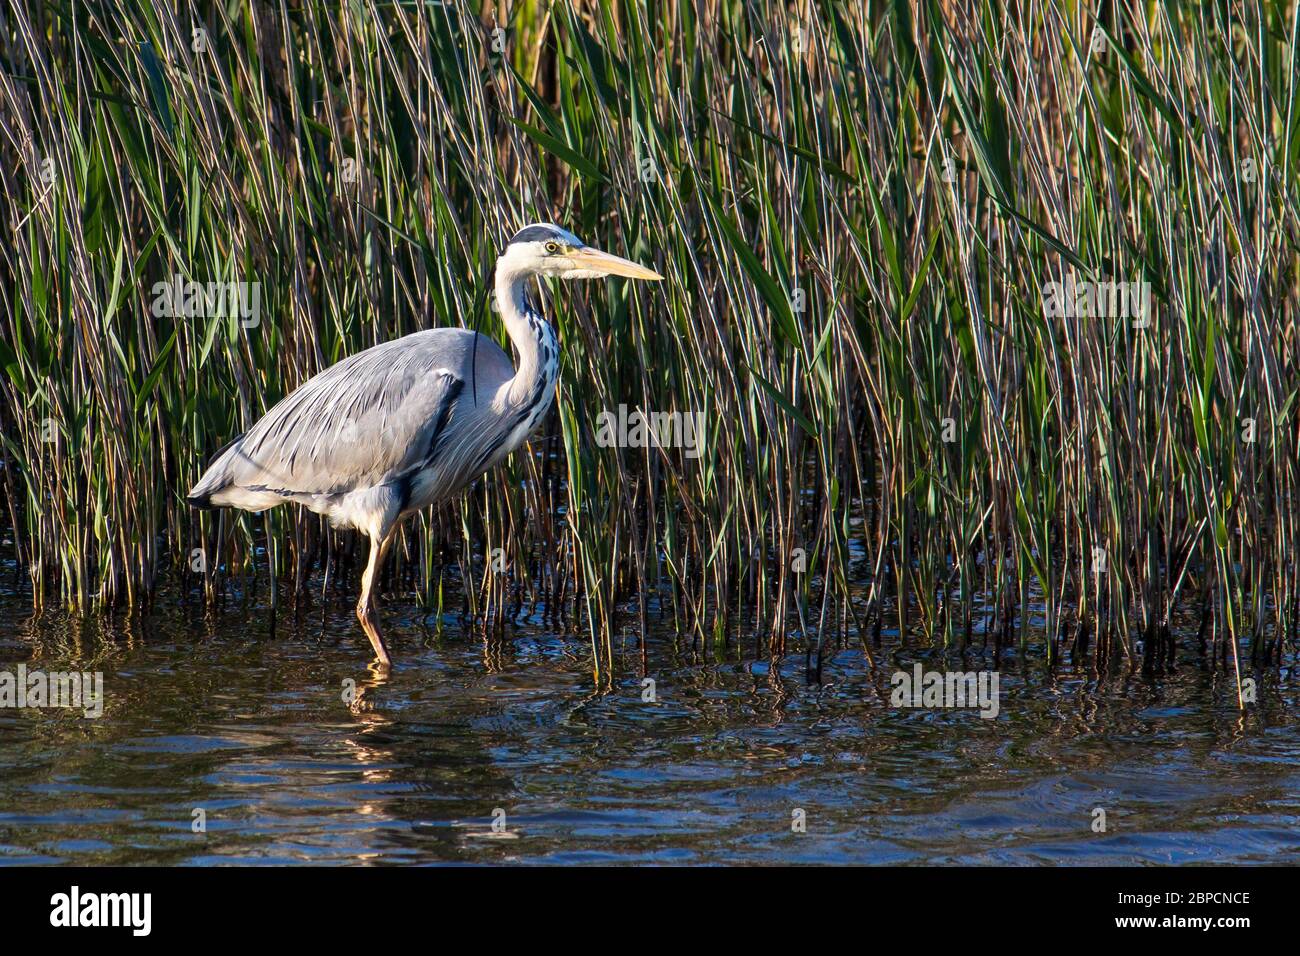 Side View of Grey Heron Standing in Water with Reeds Stock Photo